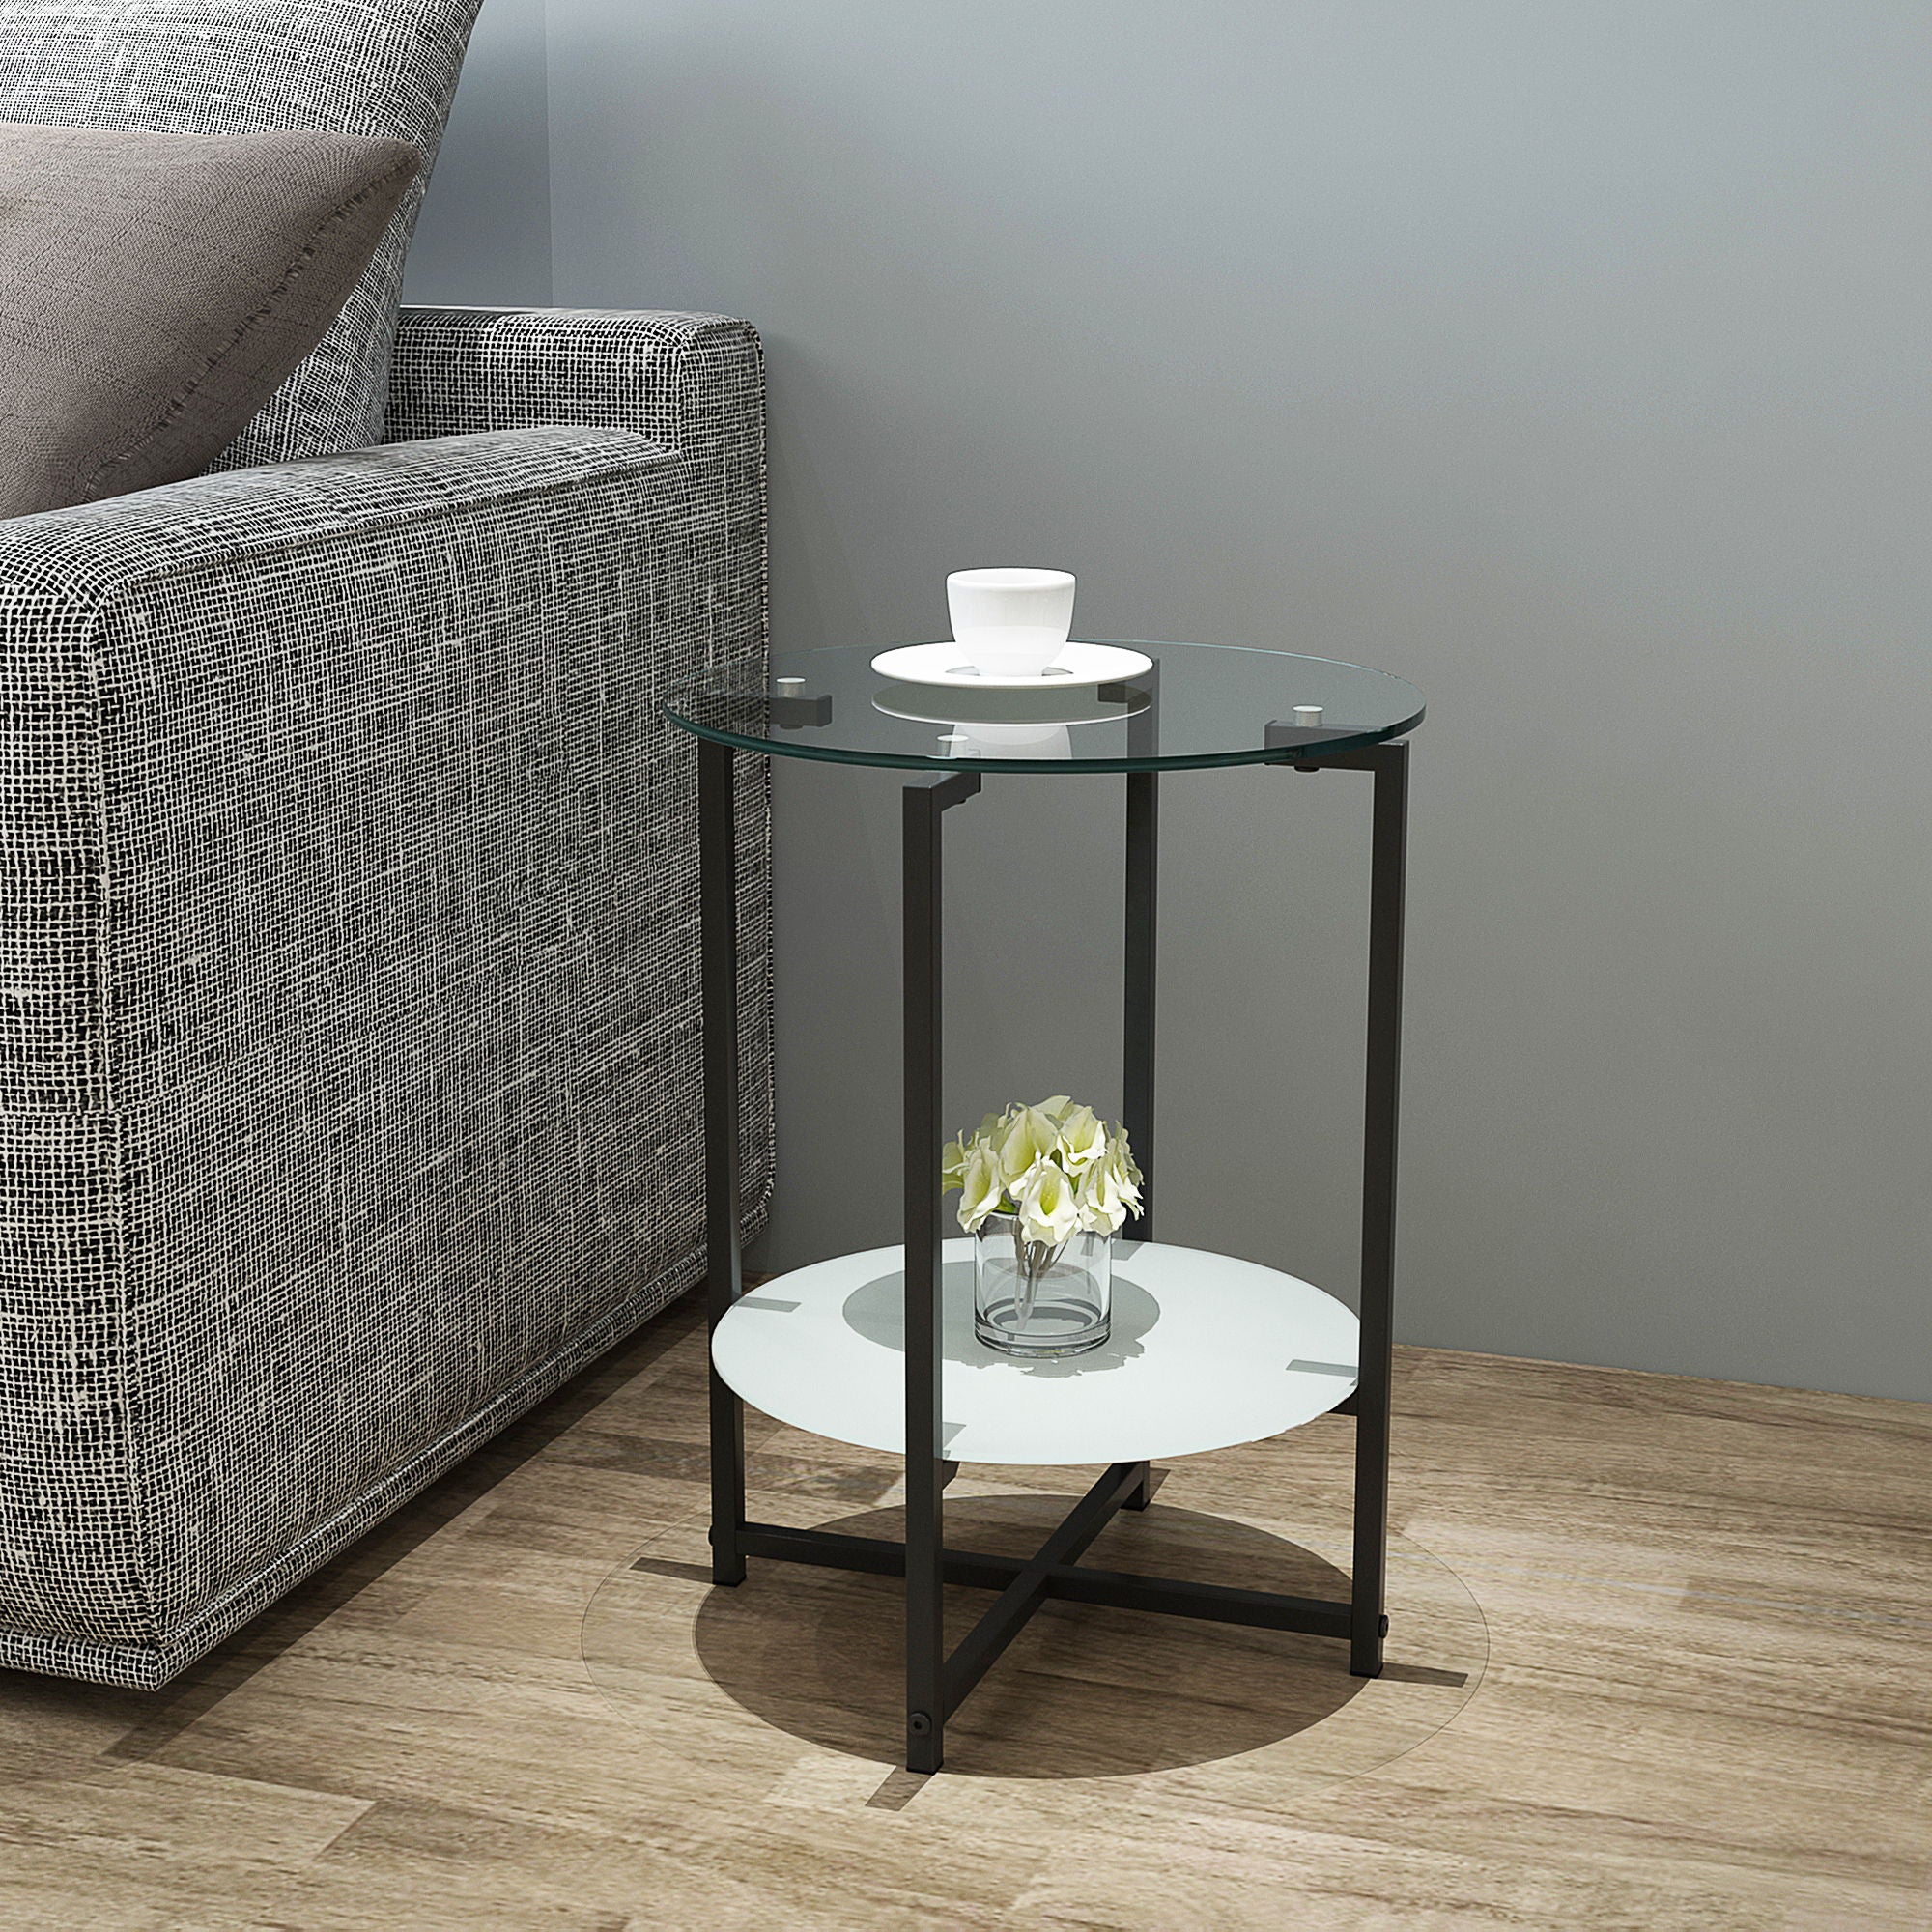 2 - Layer Tempered Glass End Table, Round Coffee Table For Bedroom Office